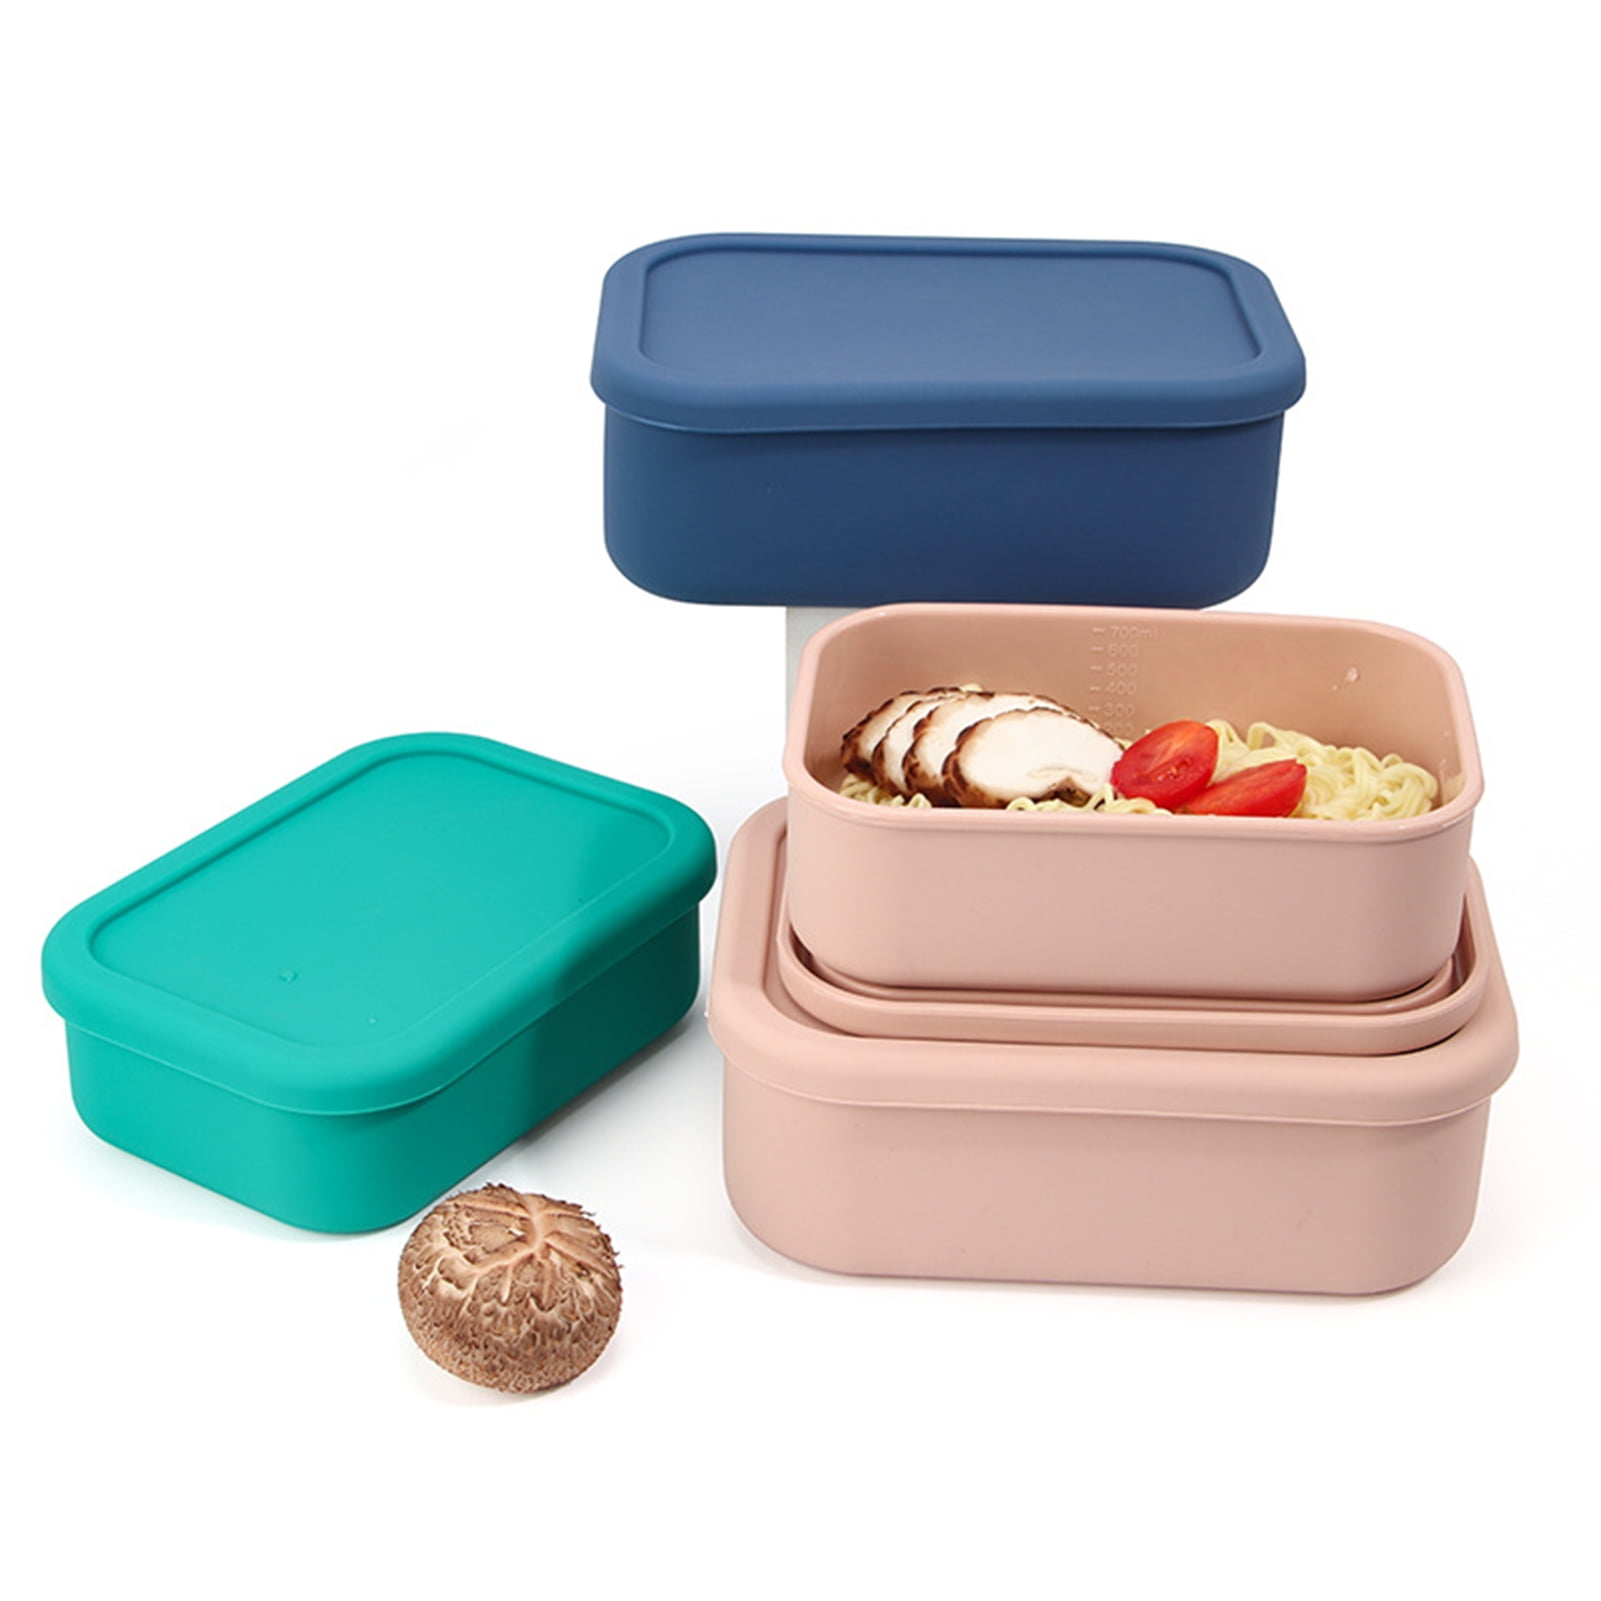 Bento Lunch Box  For Kids Food Containers Microwavable Bento Snack  Stainless Steel School Waterproof Storage Boxes RRA12747 From Top_health,  $17.19